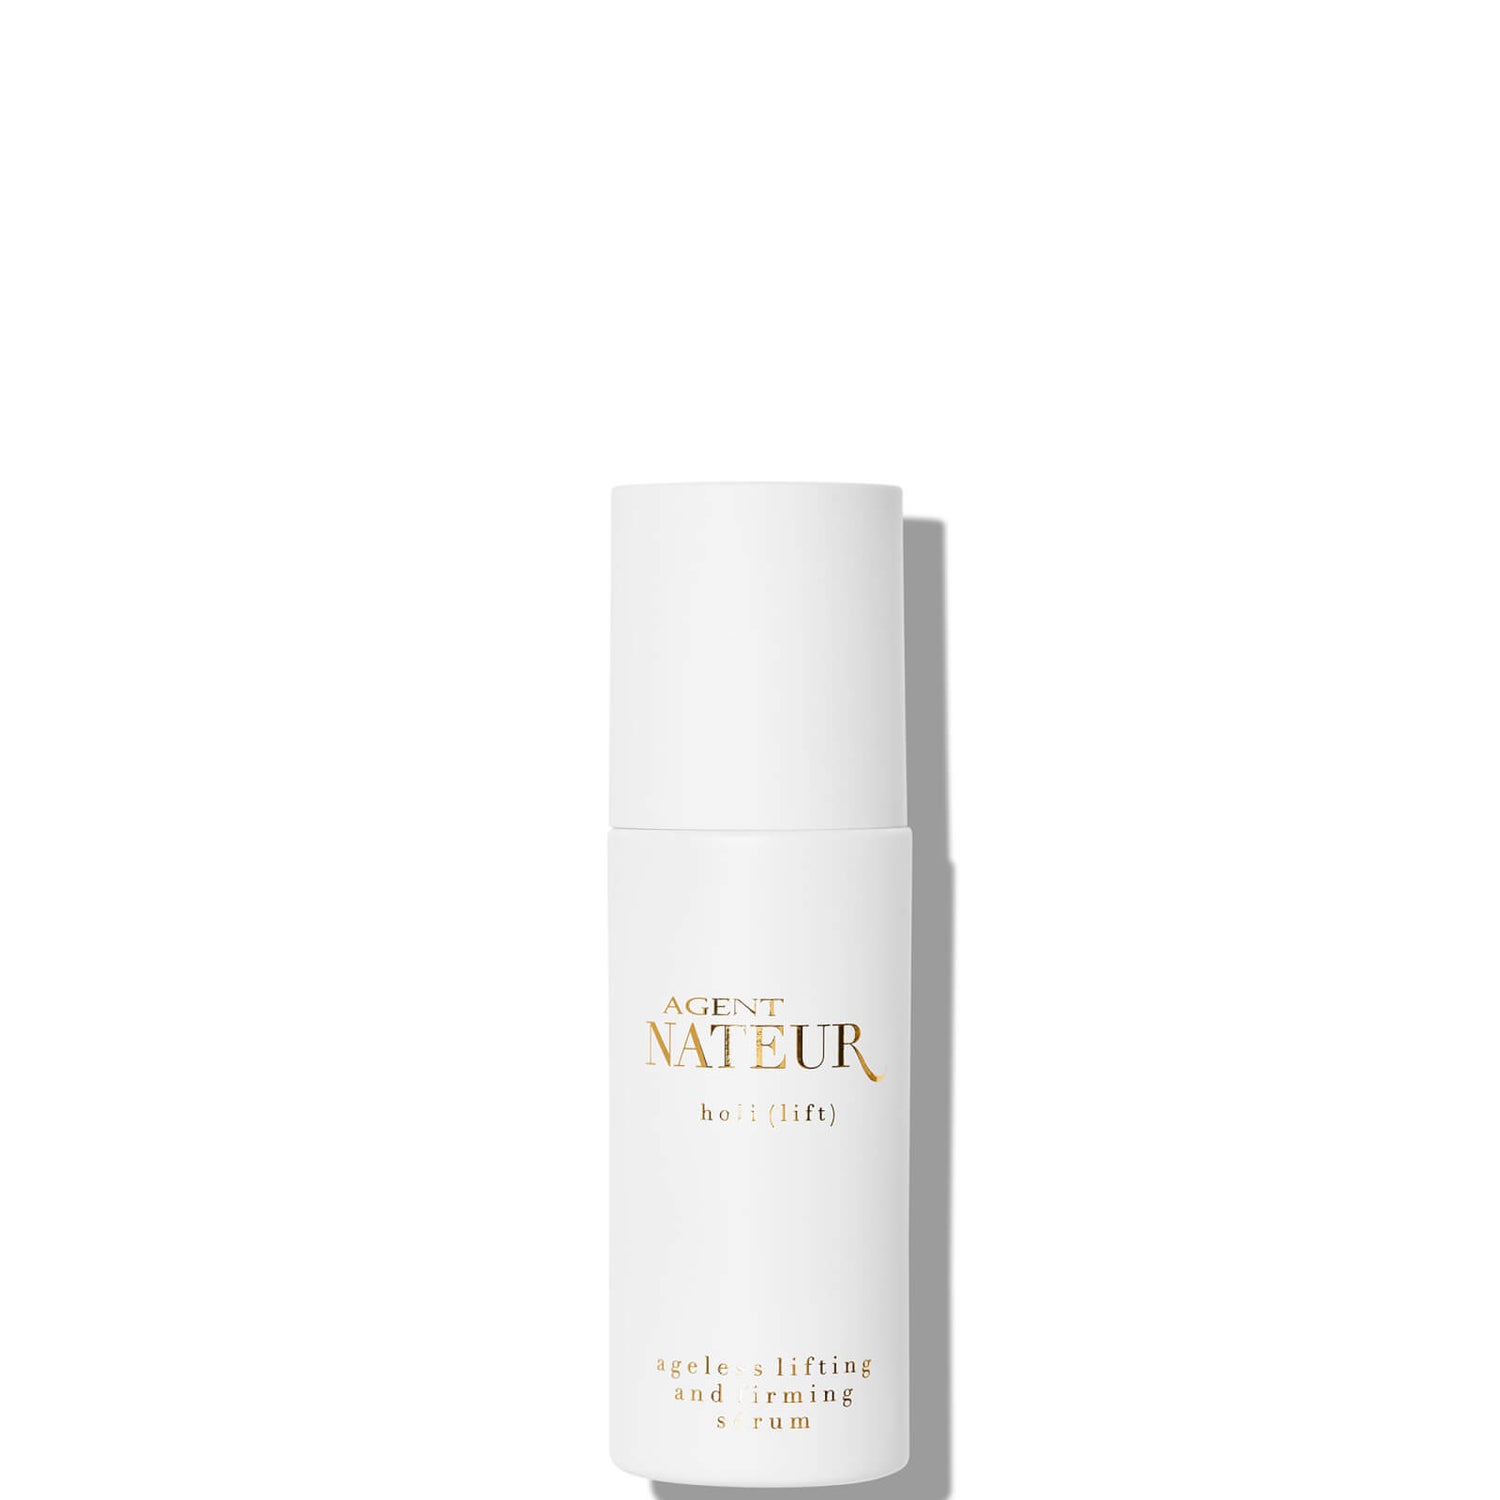 AGENT NATEUR Holi (Lift) Ageless Lifting and Firming Serum 50ml